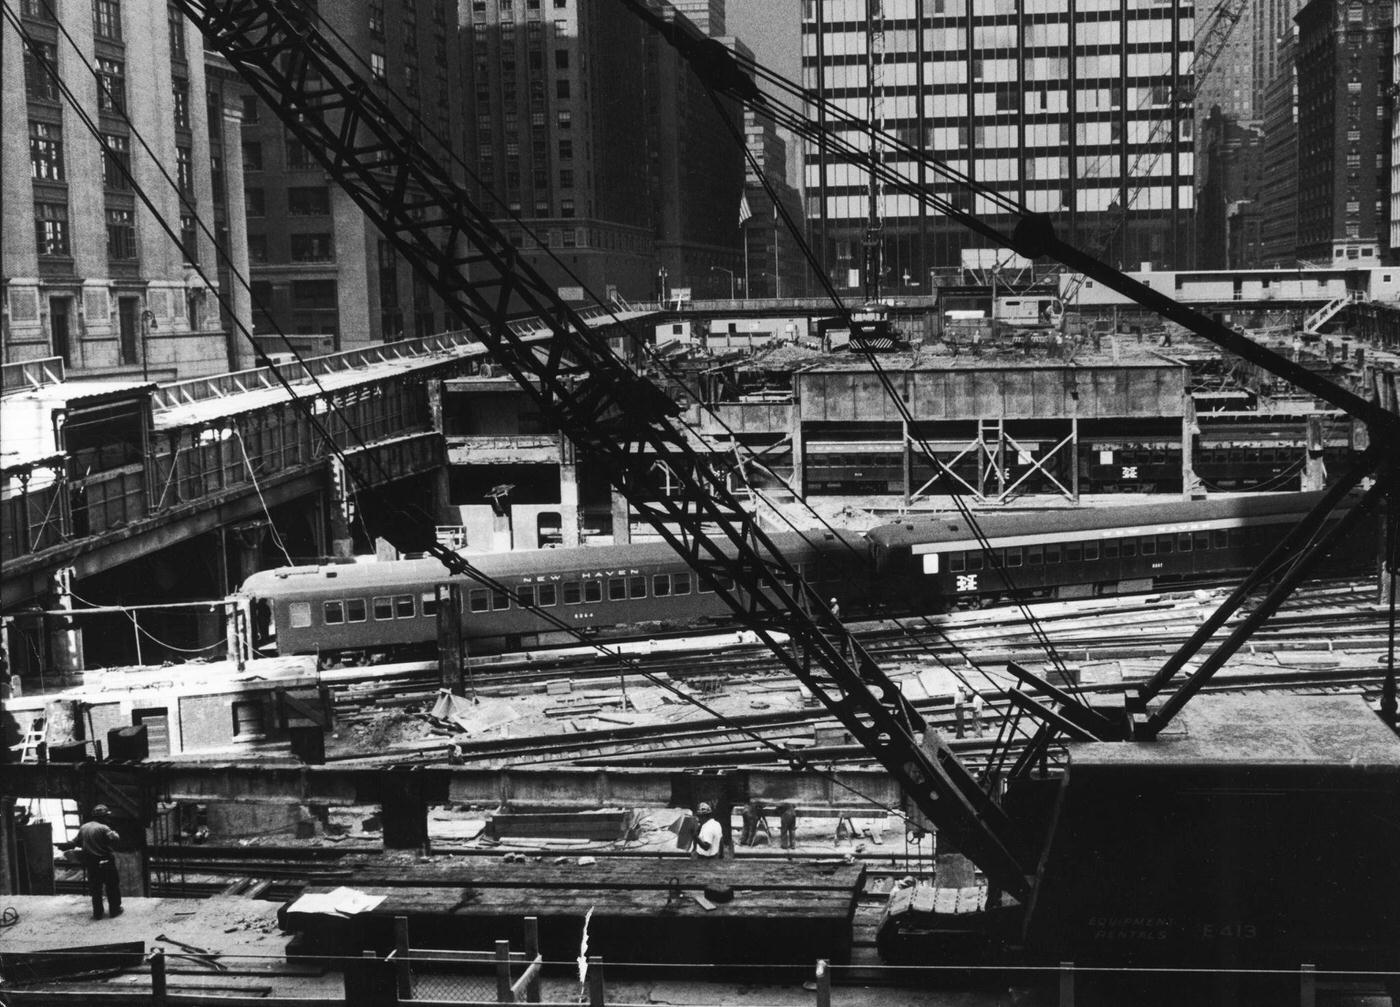 Railroad Tracks Leading Into Penn Station Blocked By Pan Am Building Construction, Manhattan, 1962